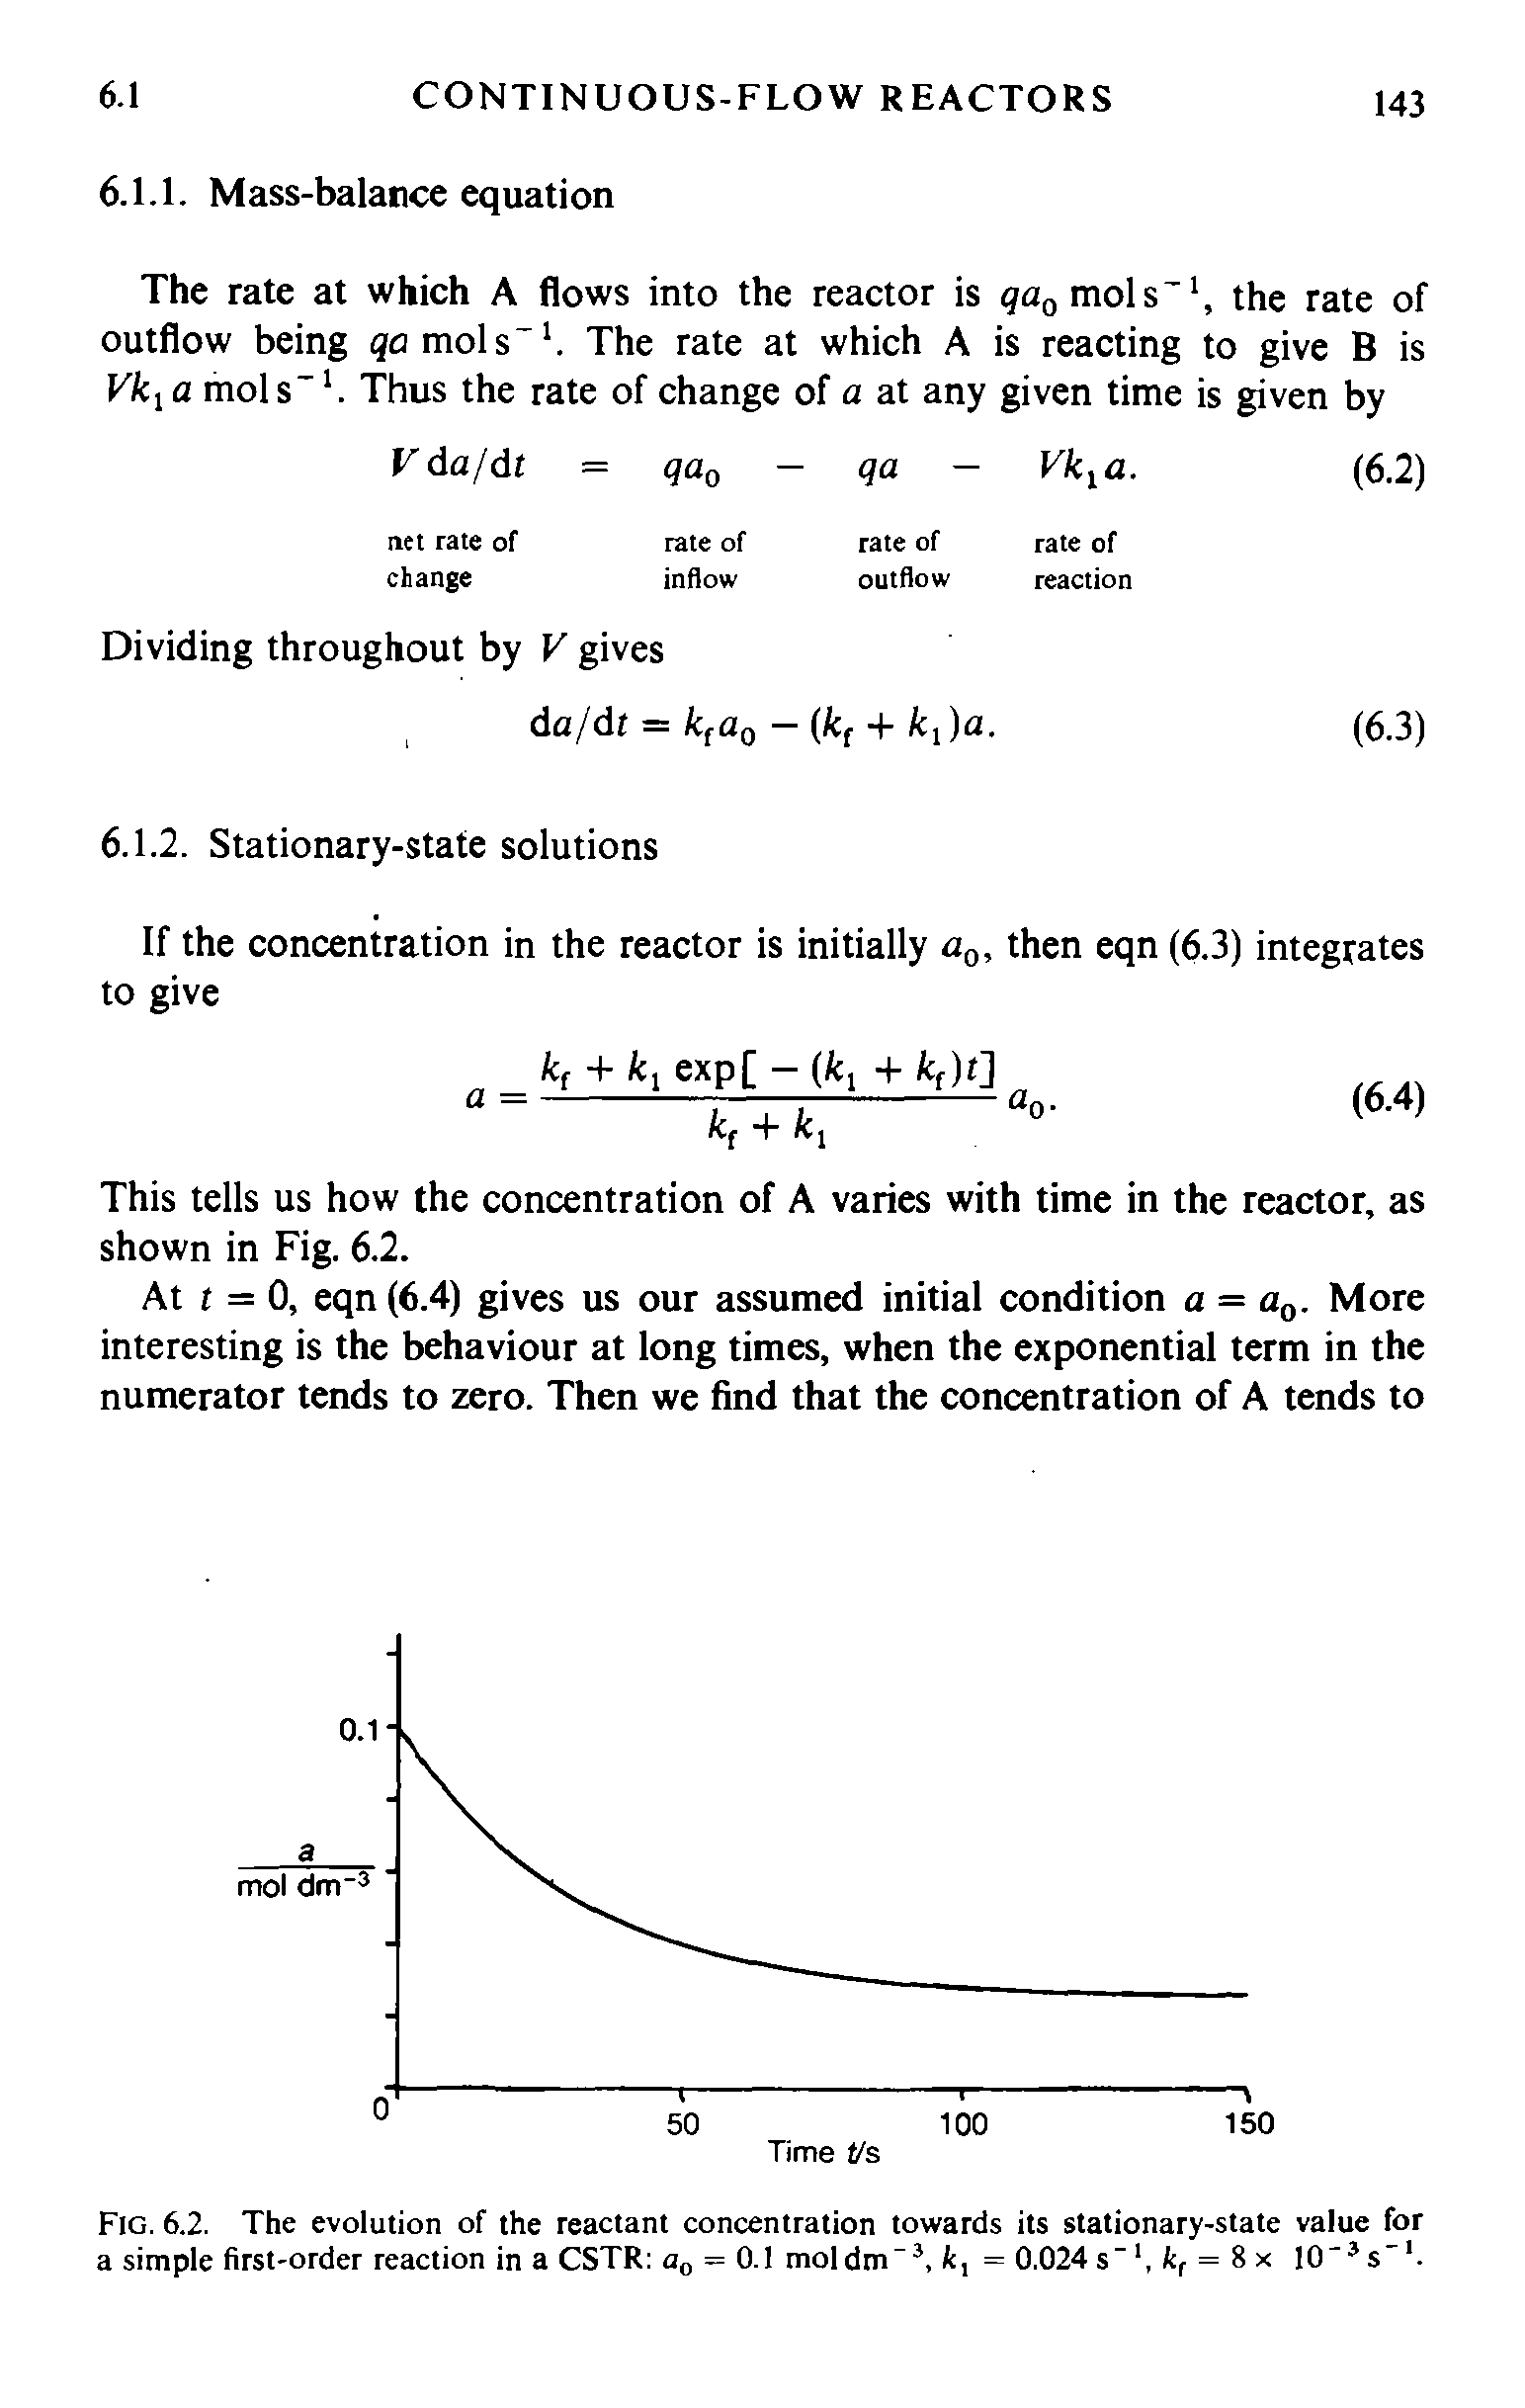 Fig. 6.2. The evolution of the reactant concentration towards its stationary-state value for a simple first-order reaction in a CSTR a0 = 0.1 mol dm-3, A, = 0.024 s" k, = 8 x 10 " 3 s ...